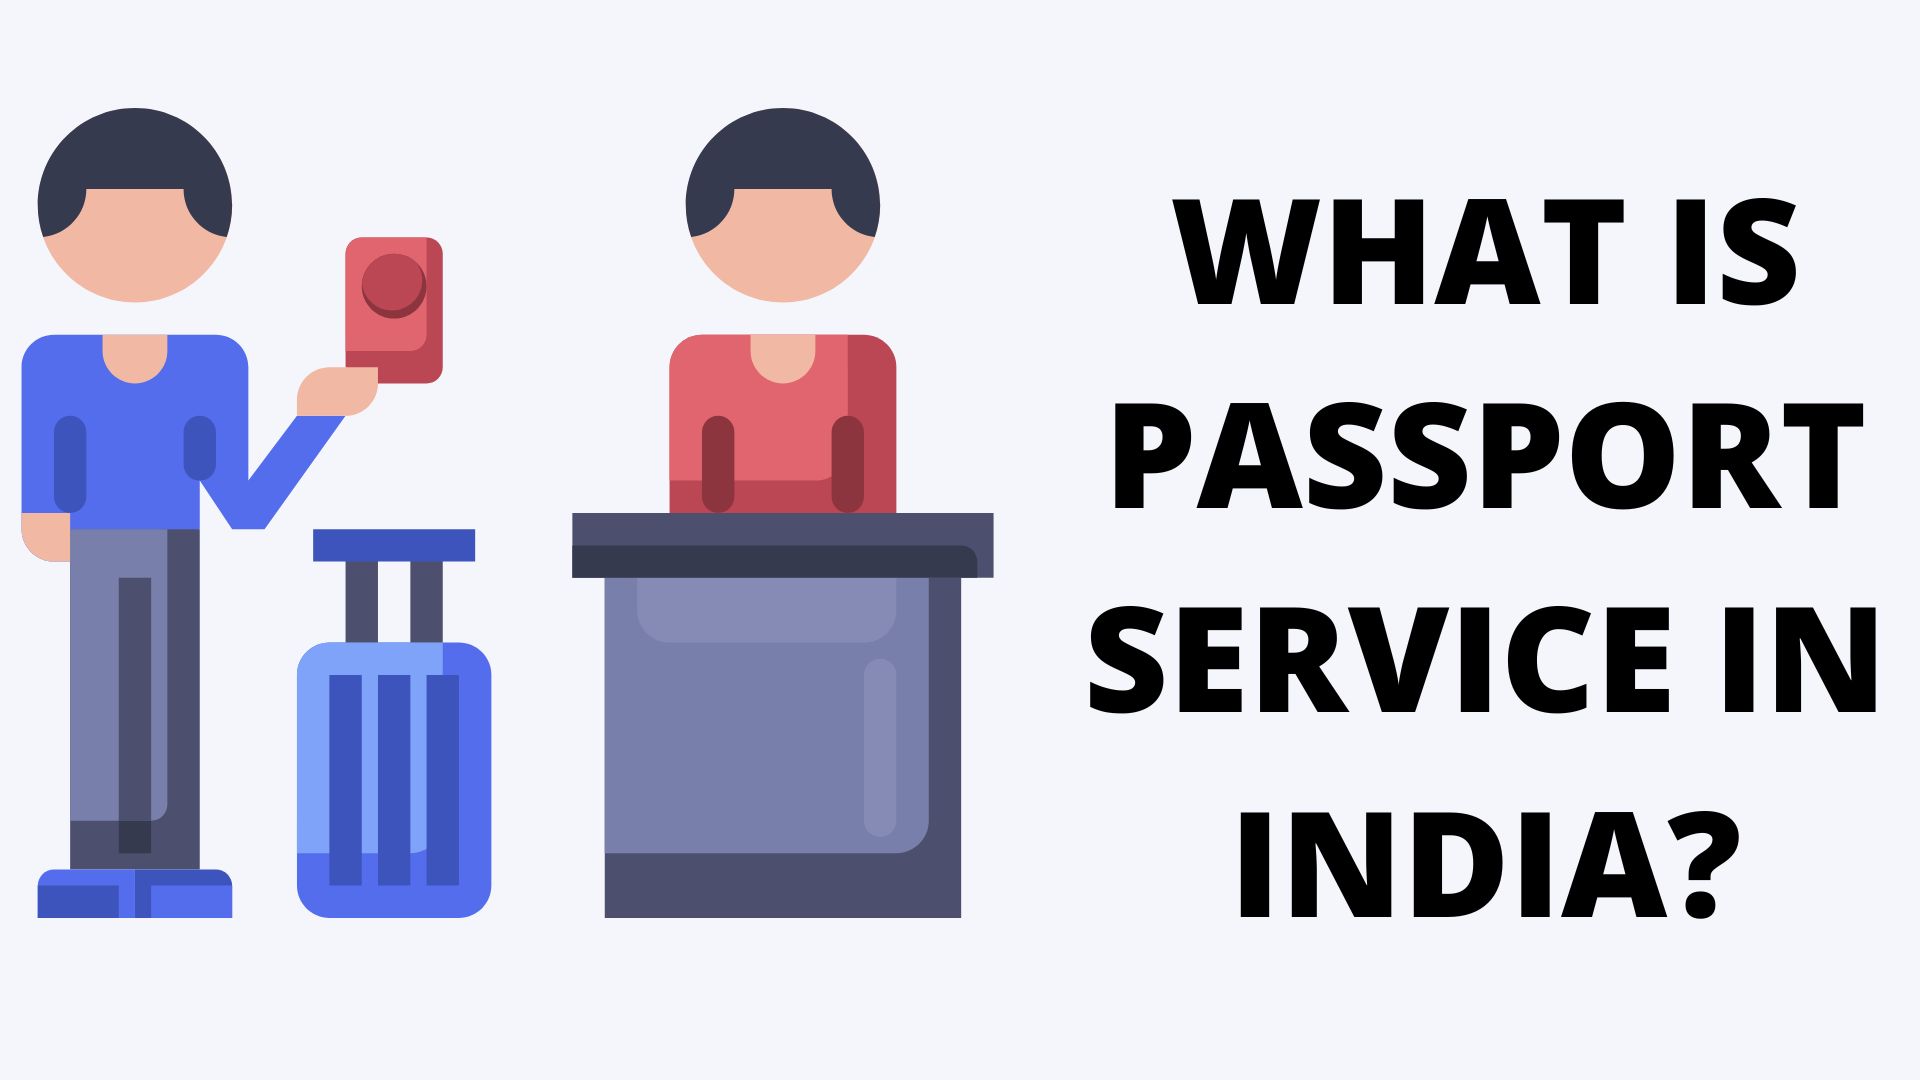 WHAT IS PASSPORT SERVICE IN INDIA?